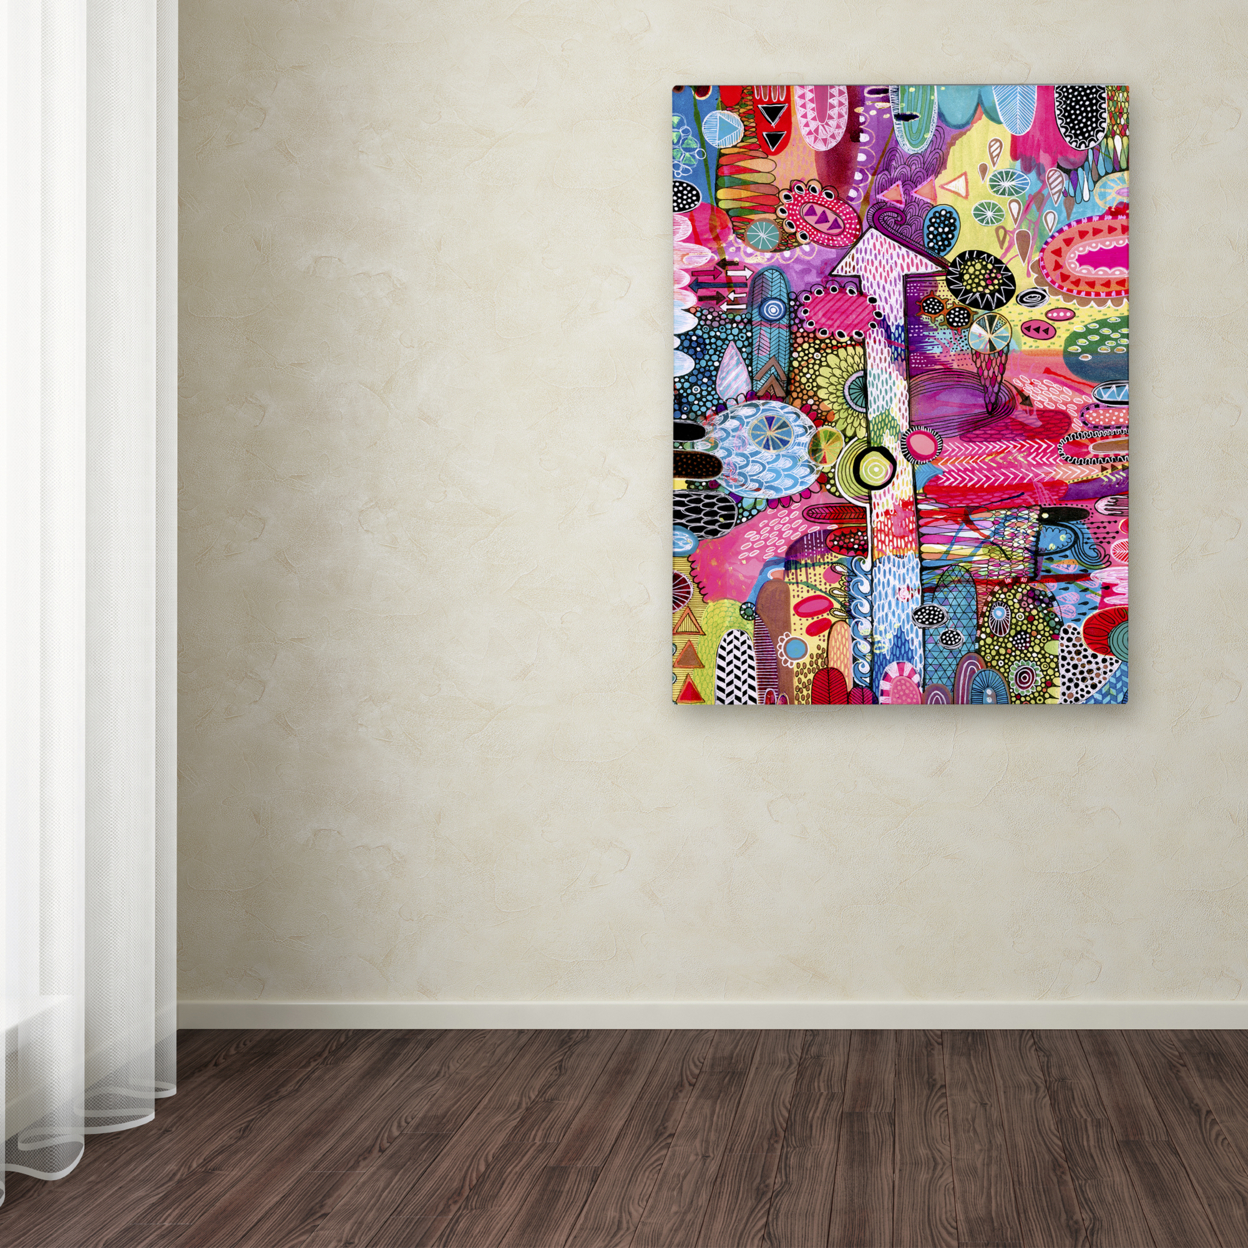 Hello Angel 'Up' Canvas Wall Art 35 X 47 Inches